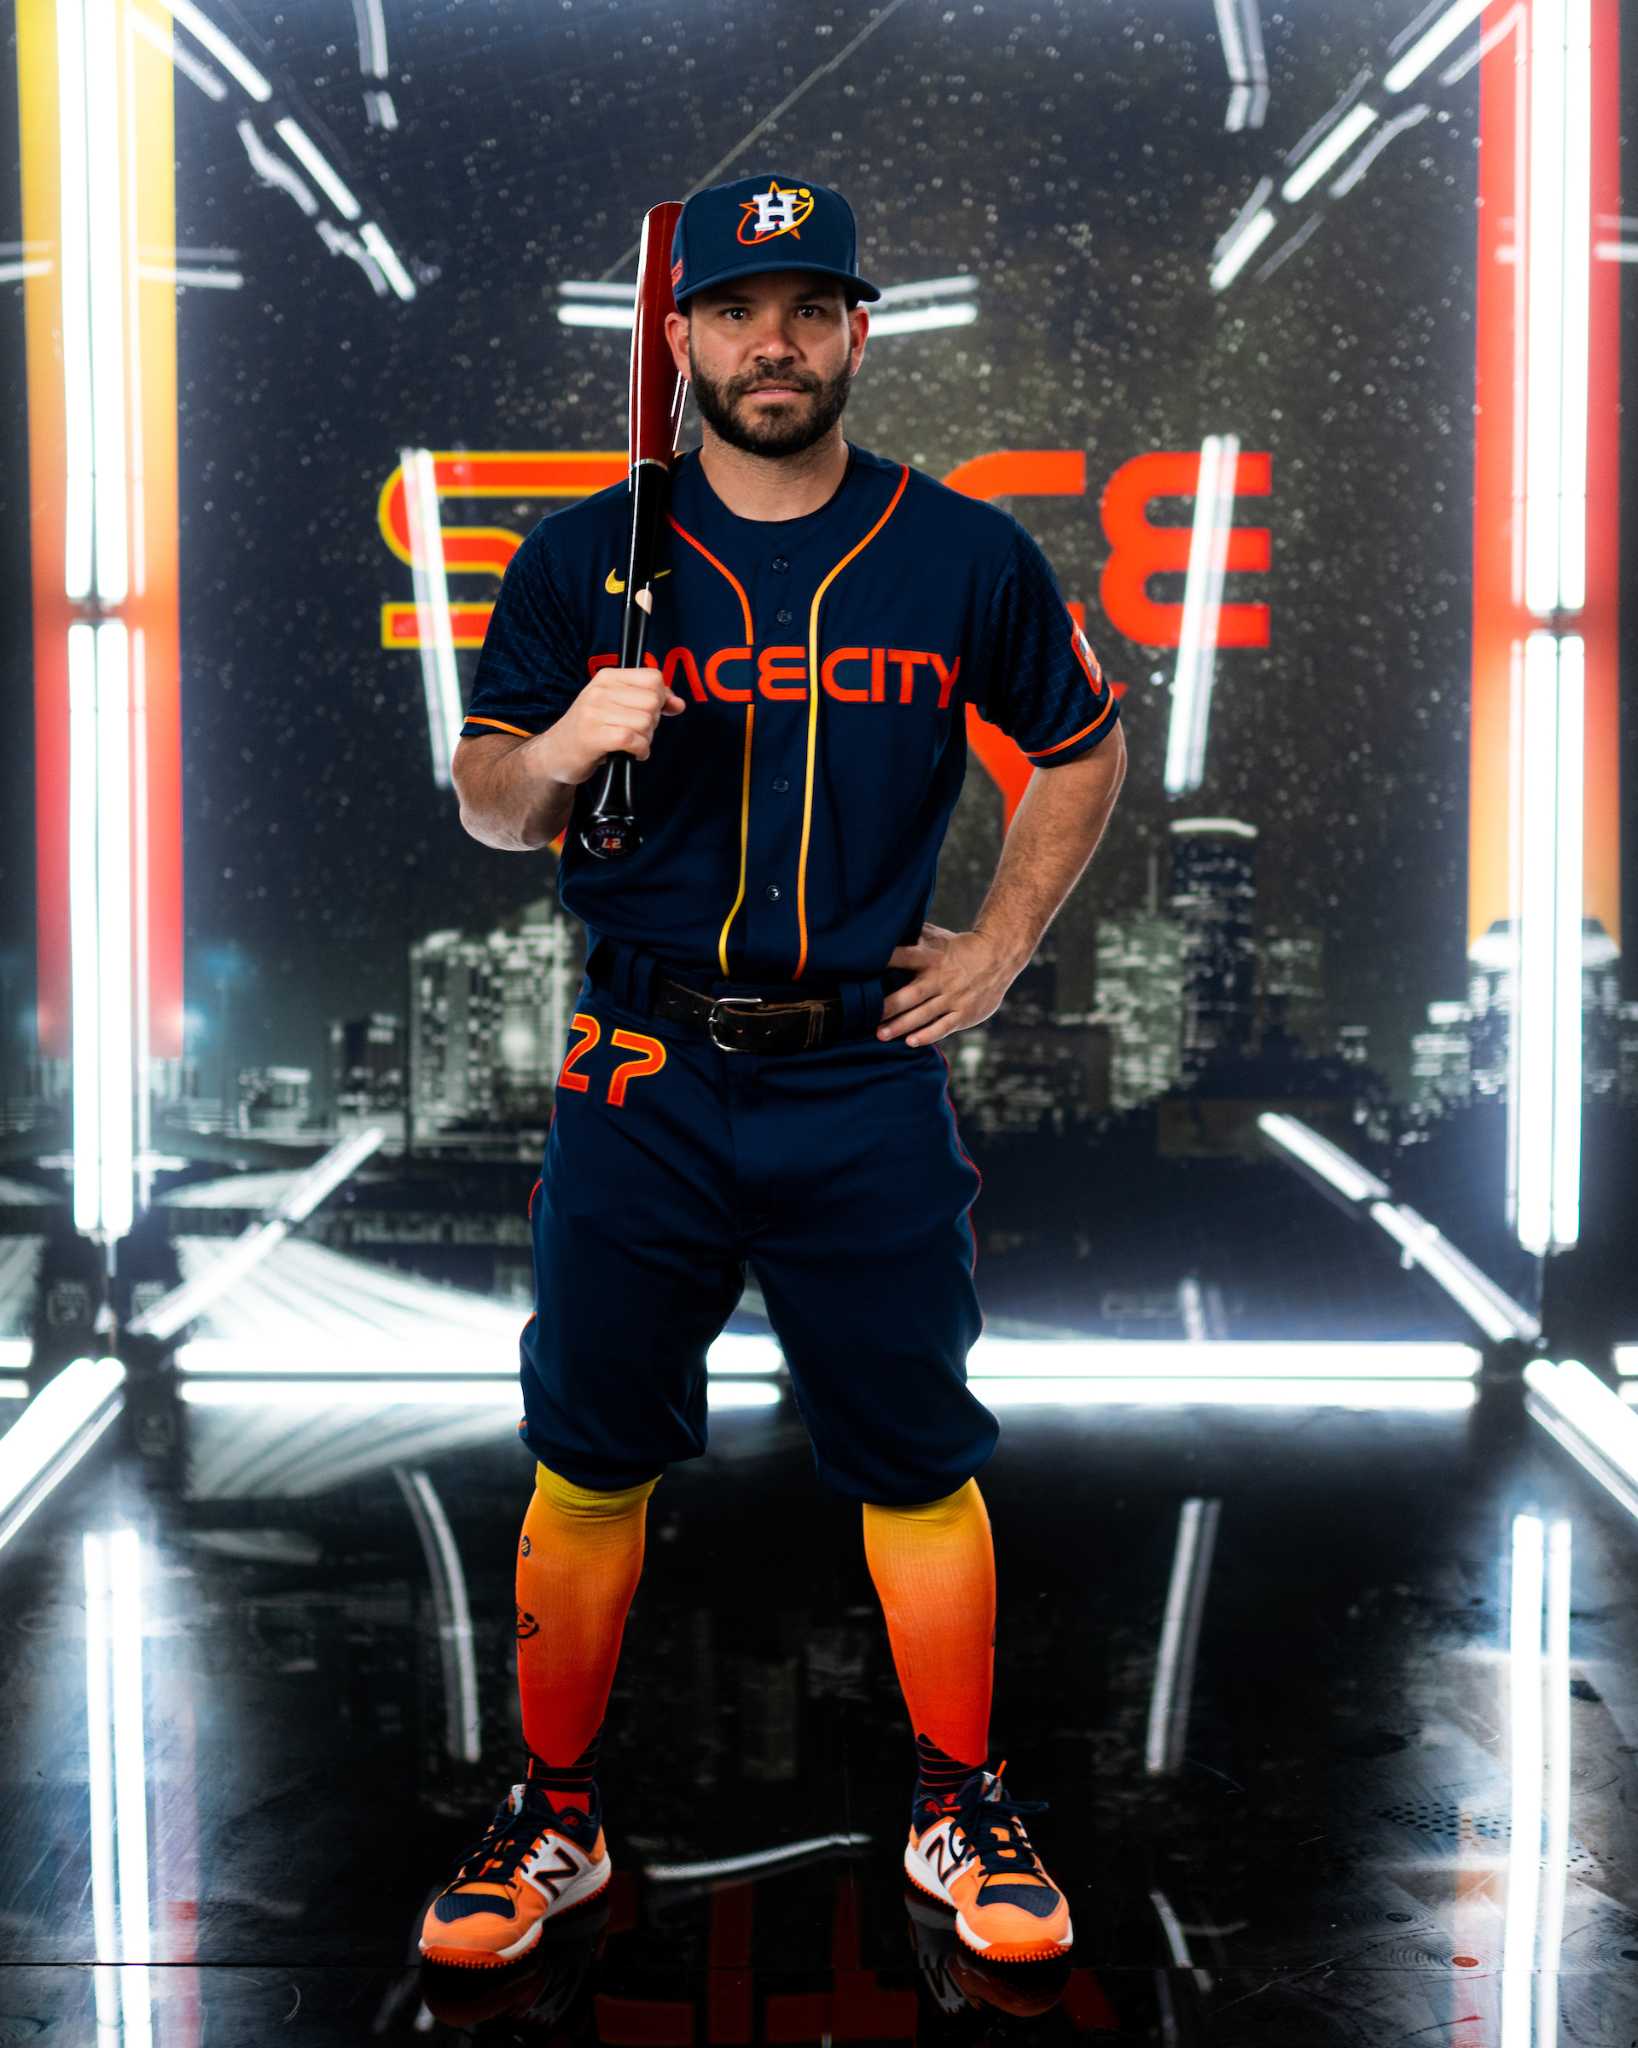 Astros' Sehgal on record-setting sales for Space City jerseys: 'The details  and storytelling within the uniform is what really makes it special